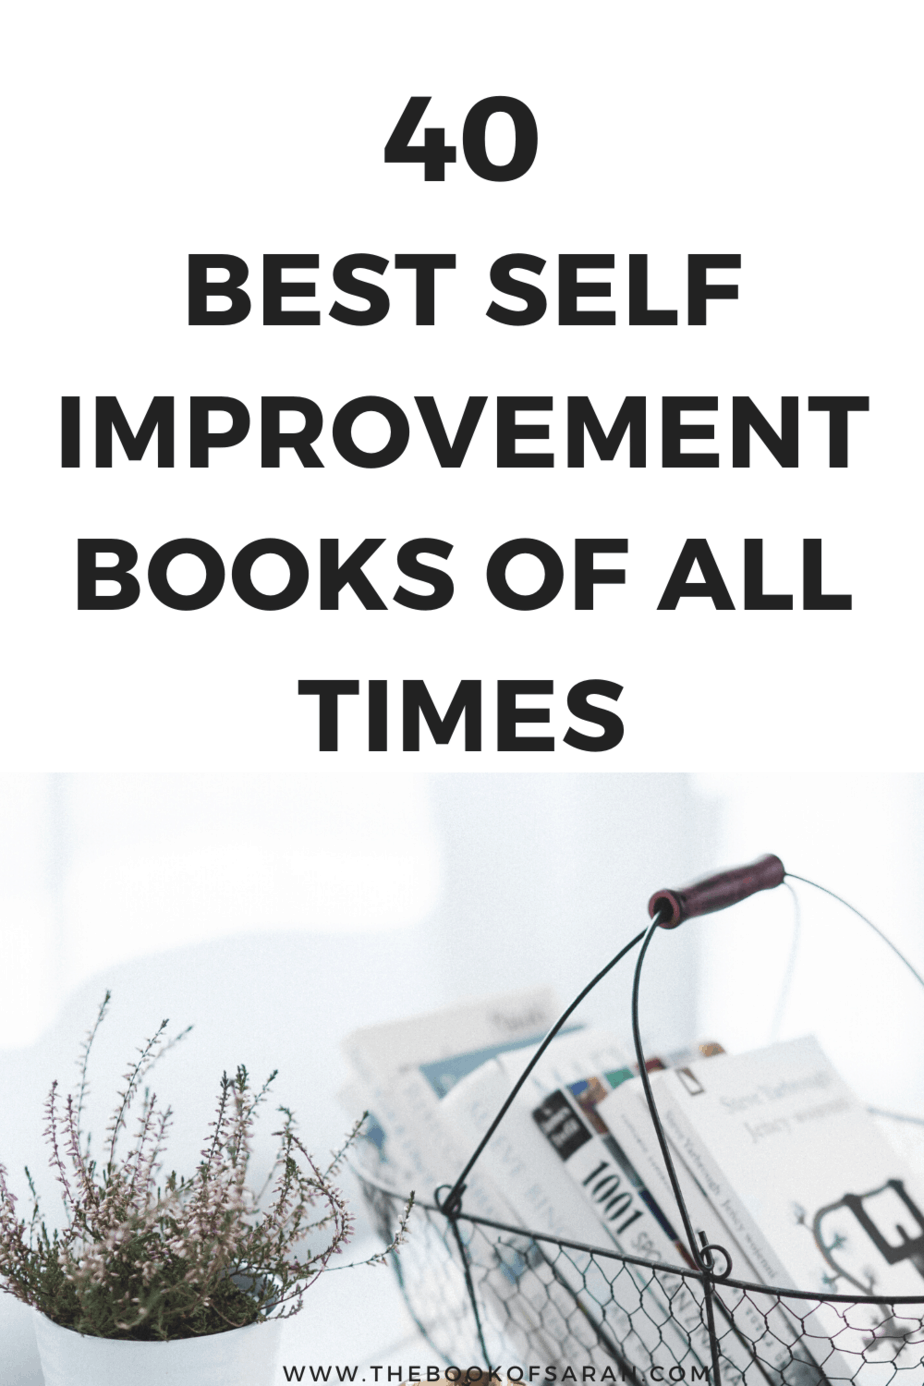 40 best self improvement books of all times